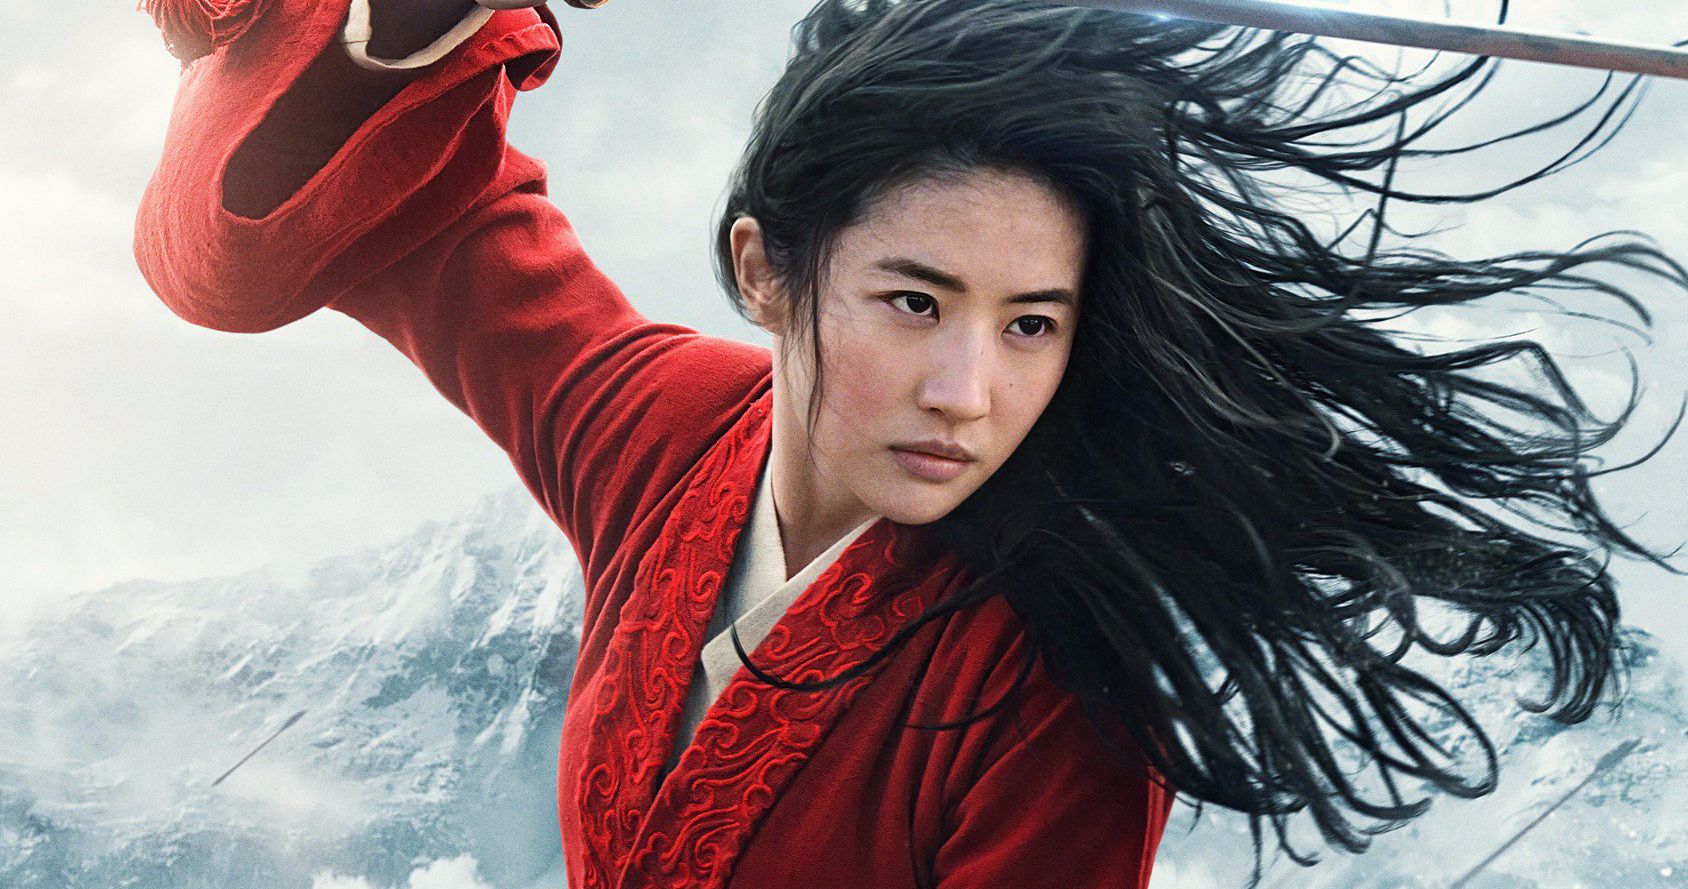 Mulan Poster Charges in Ahead of Tomorrow's New Trailer